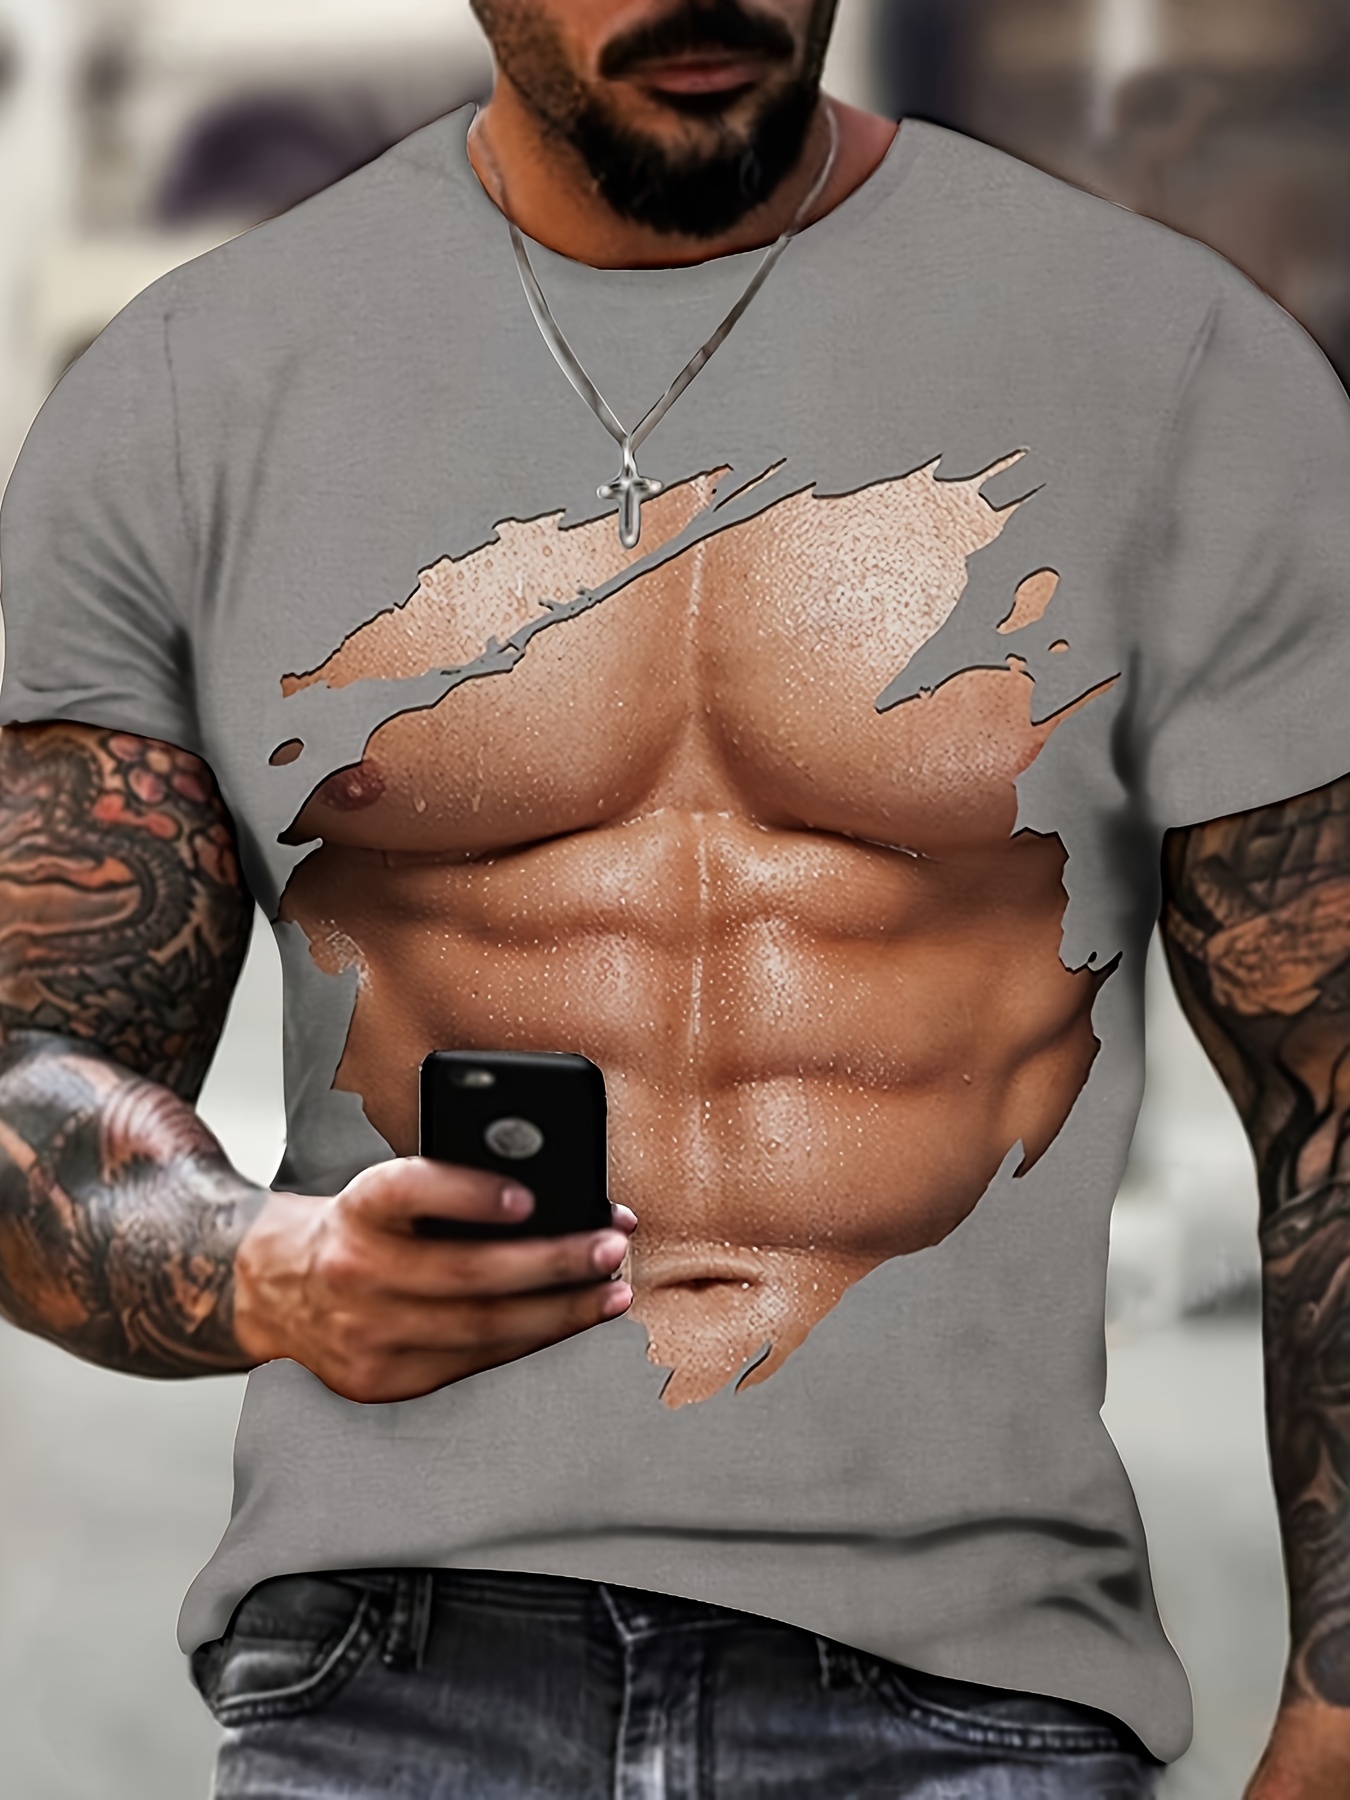 Best Shirts For Bodybuilders - Tees for bodybuilders – Jacked Jeans